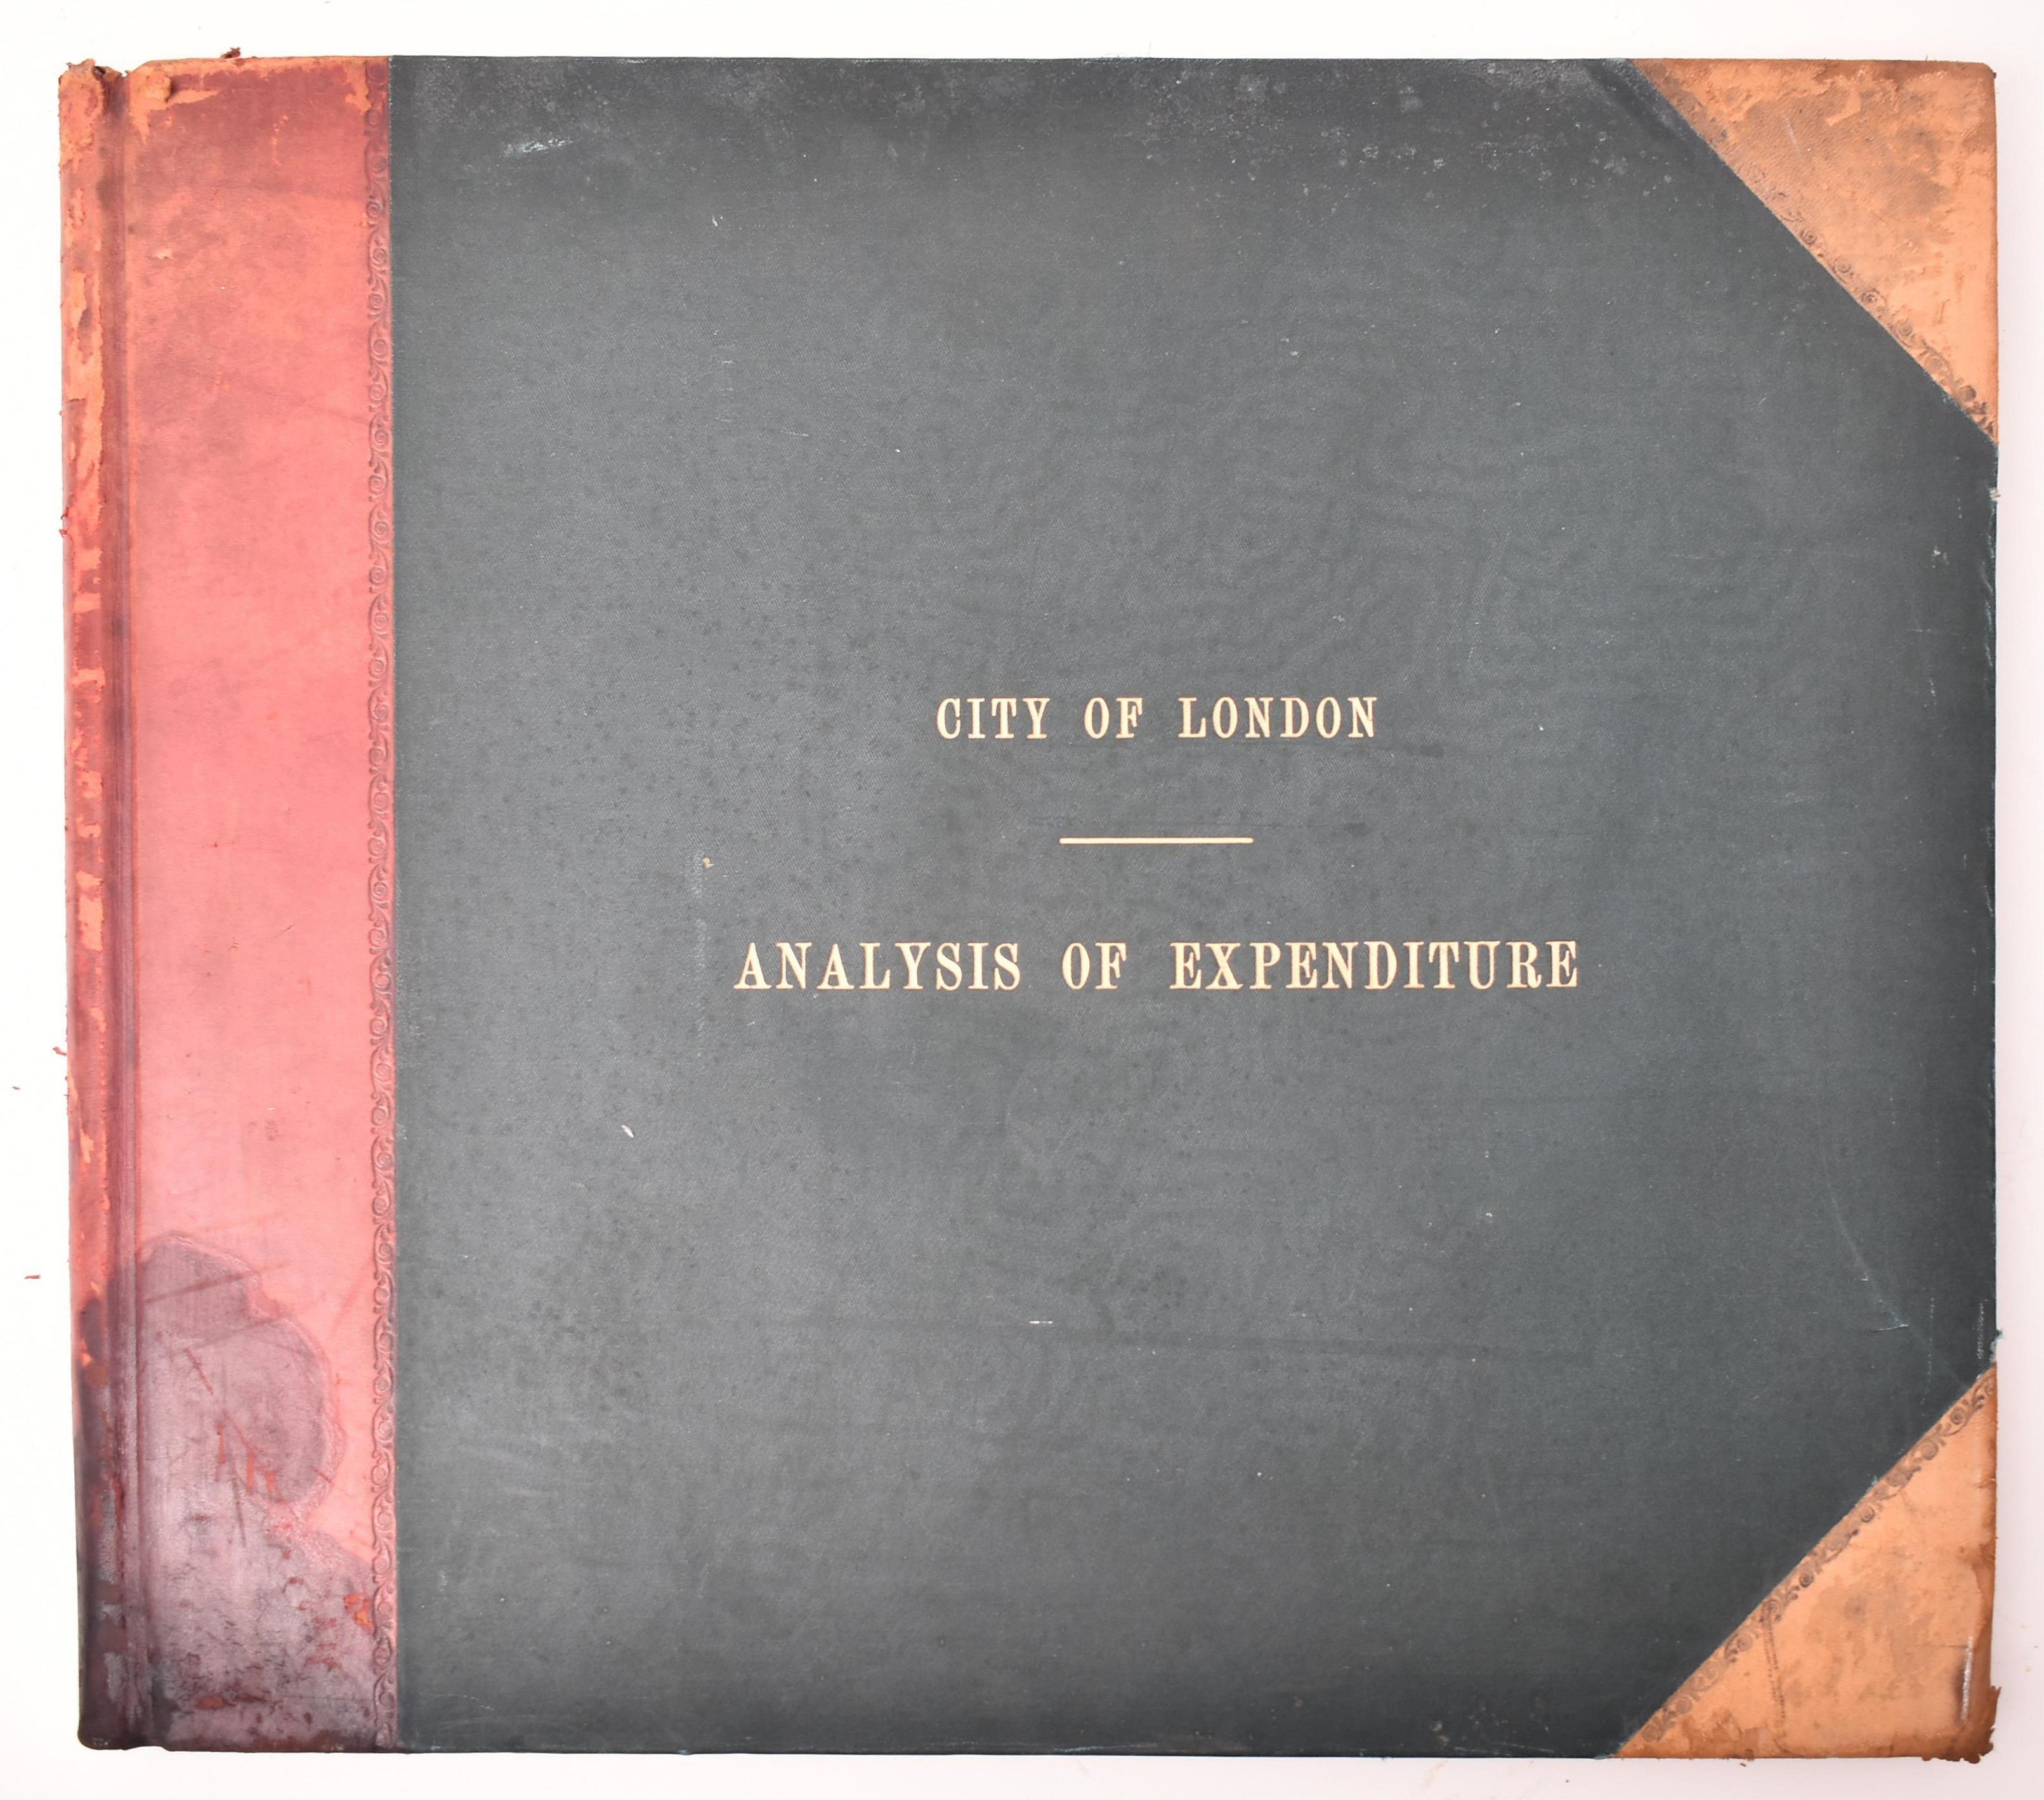 MID 20TH CENTURY LEATHERBOUND CITY OF LONDON LEDGER